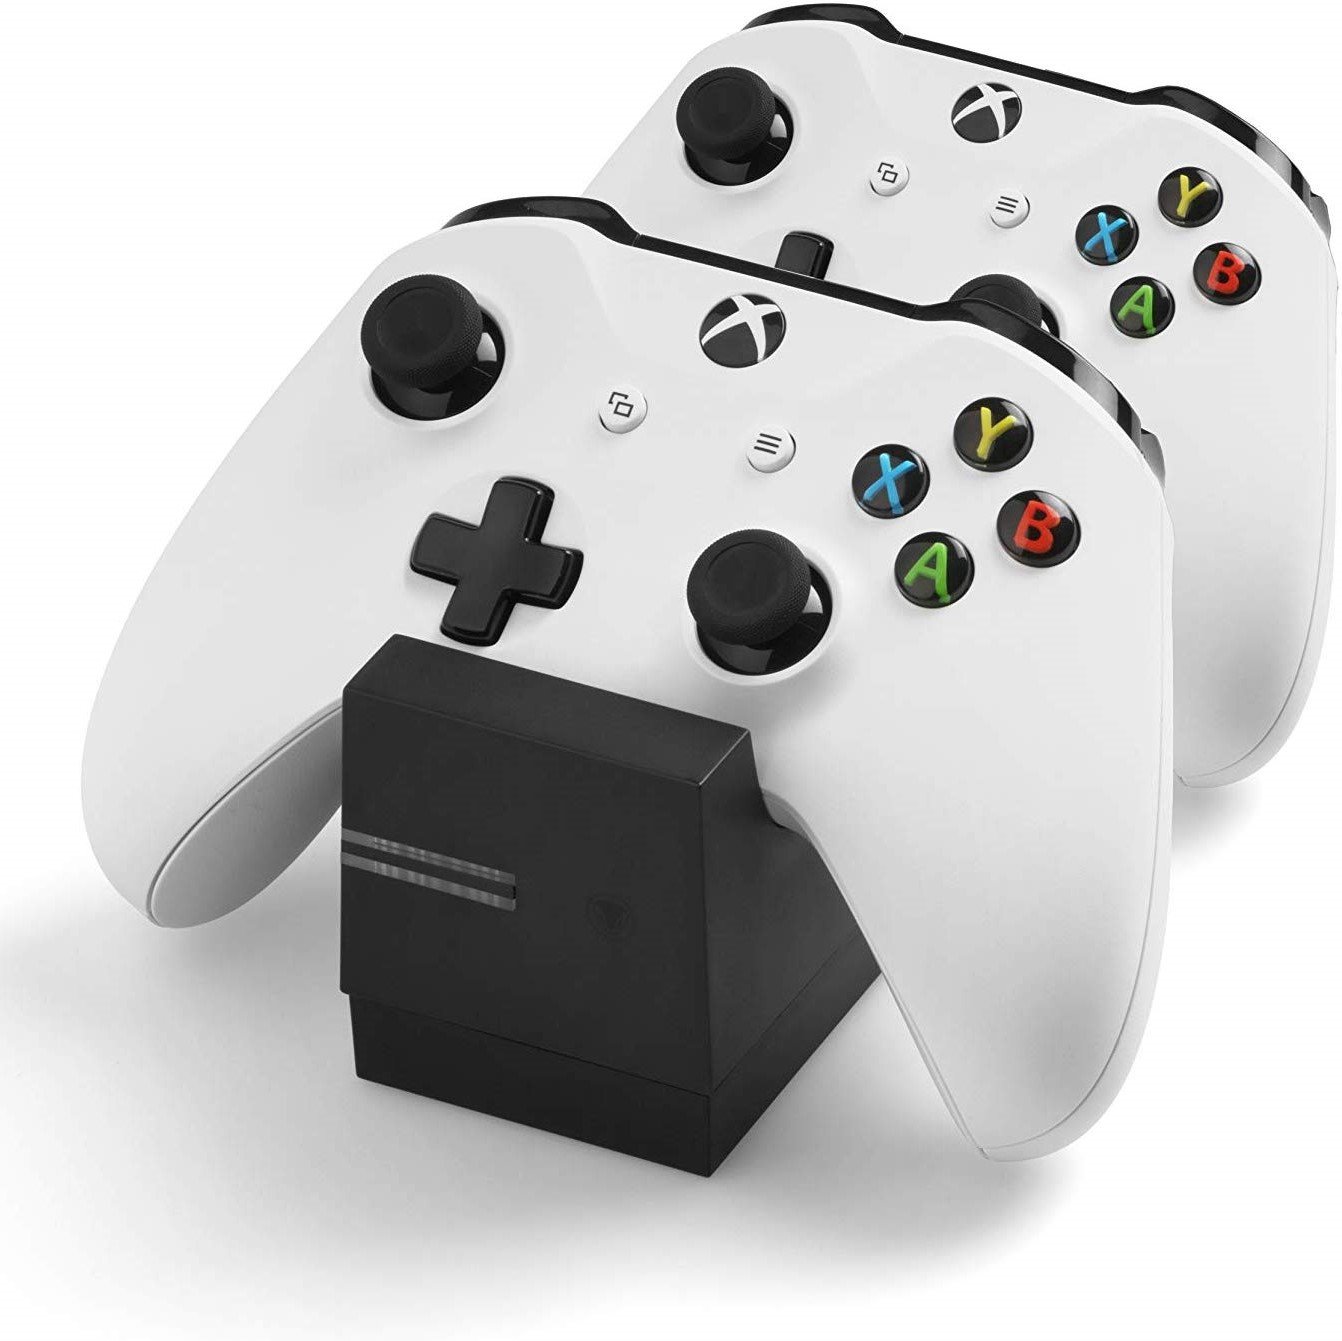 Best Xbox One X and Xbox One S Accessories in 2019 ...